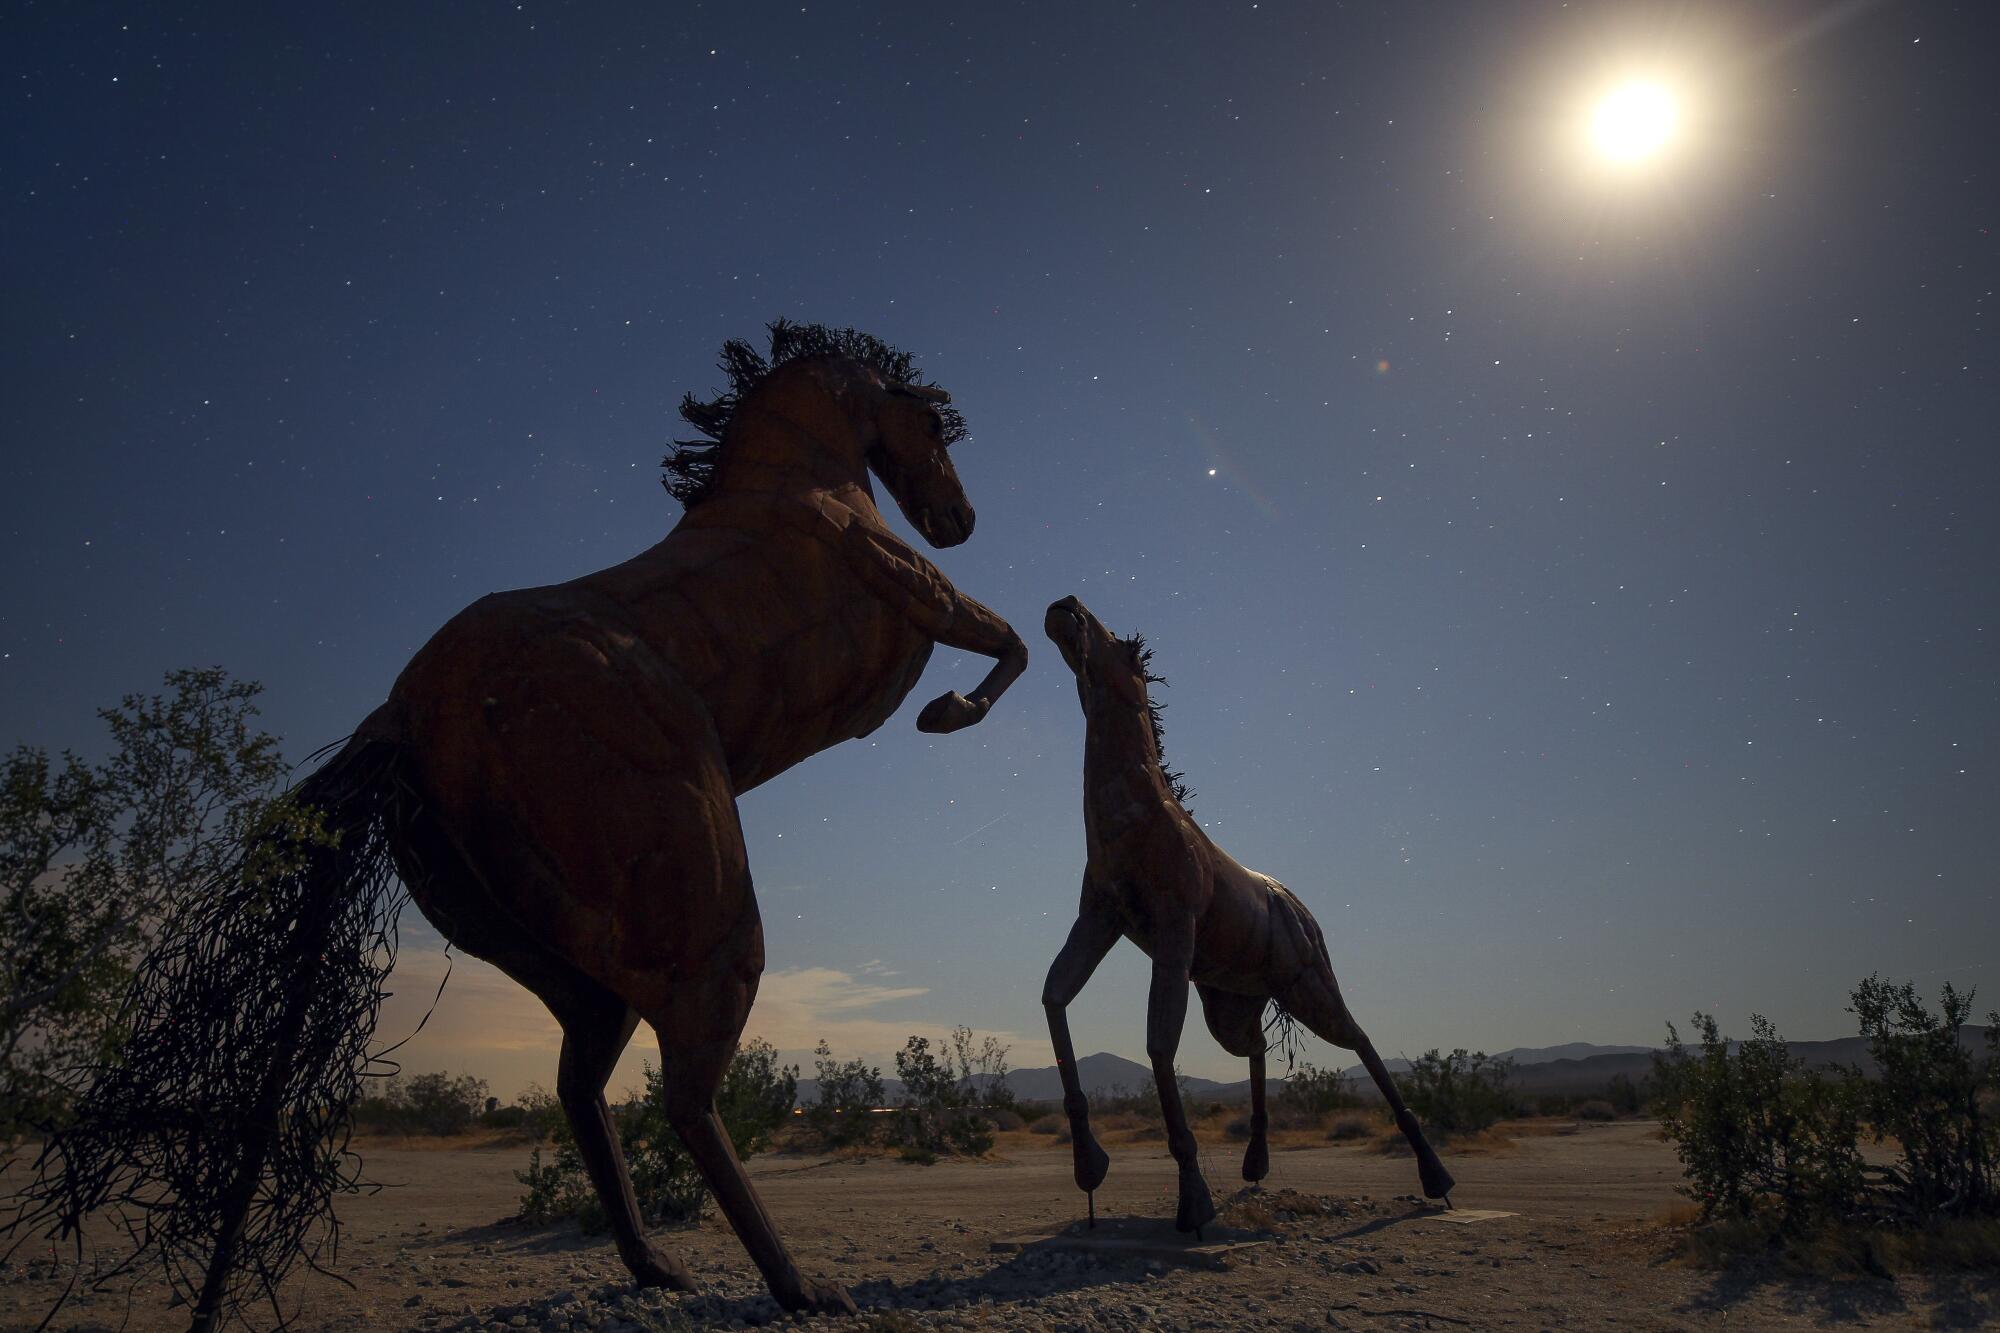 Metal sculptures of horses in the Borrego Springs area, under the moonlight in Borrego Springs.